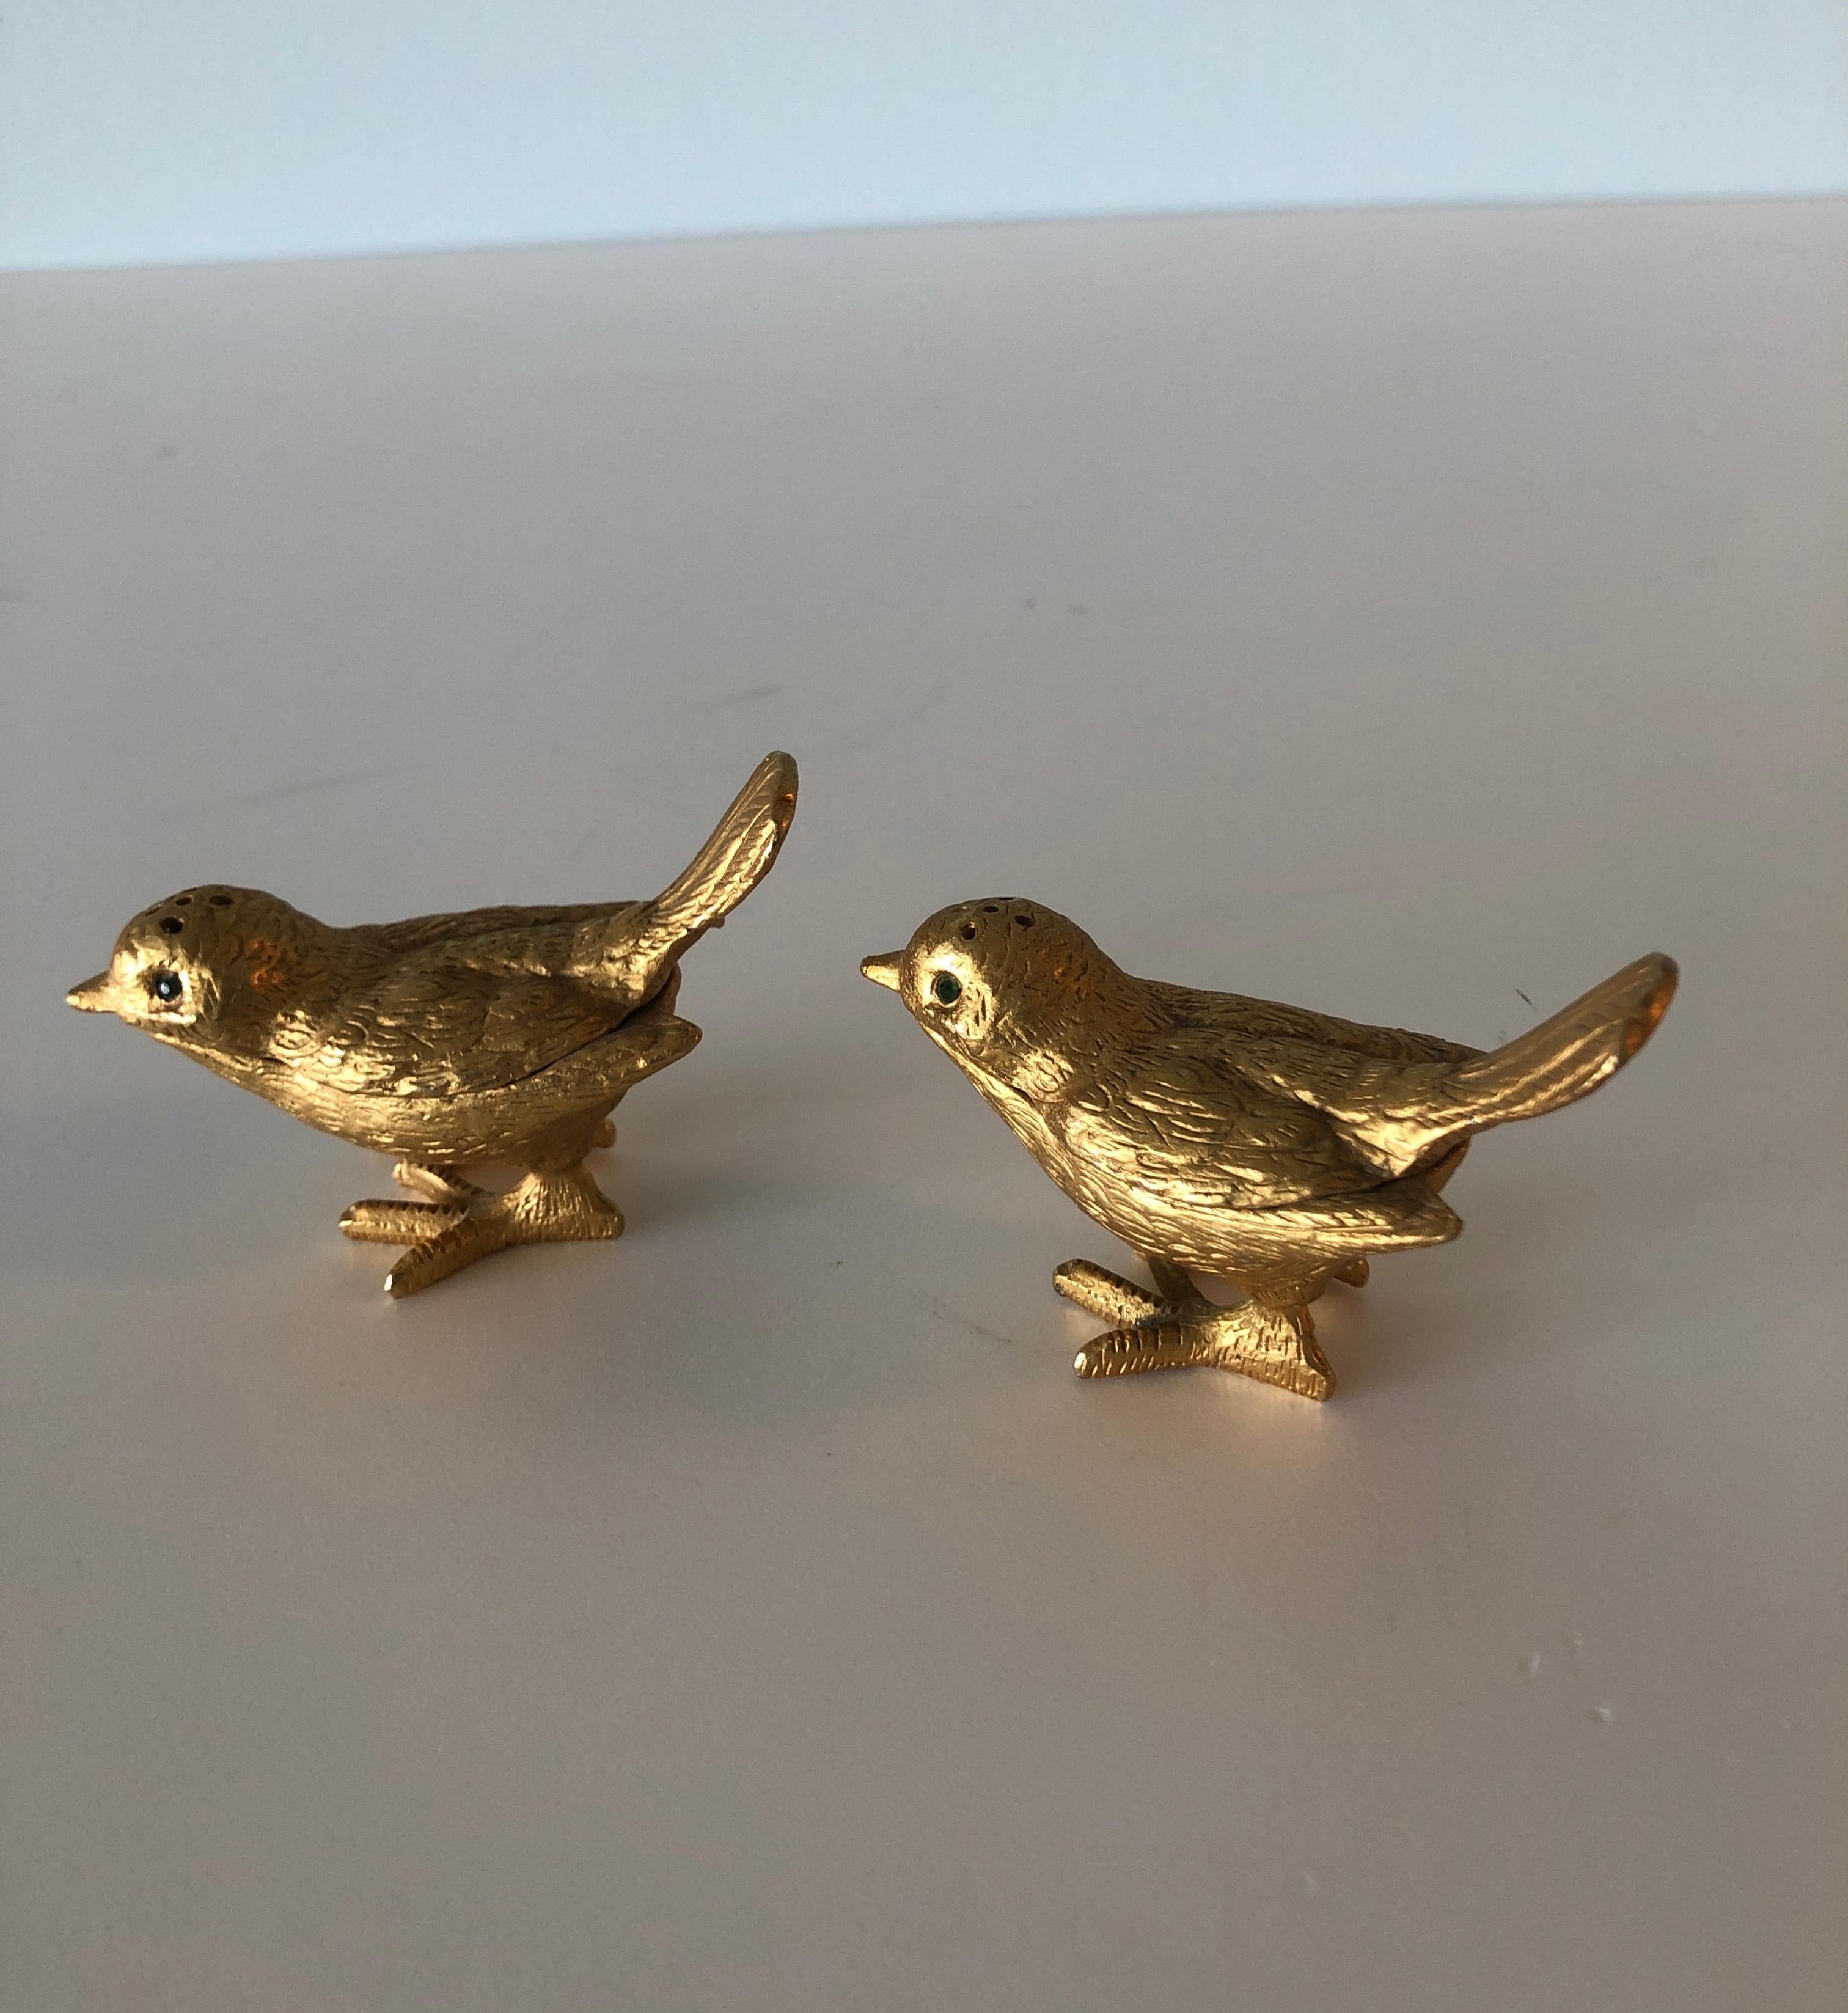 Bohemian Pair of Gold Plated Birds Salt and Pepper Shakers